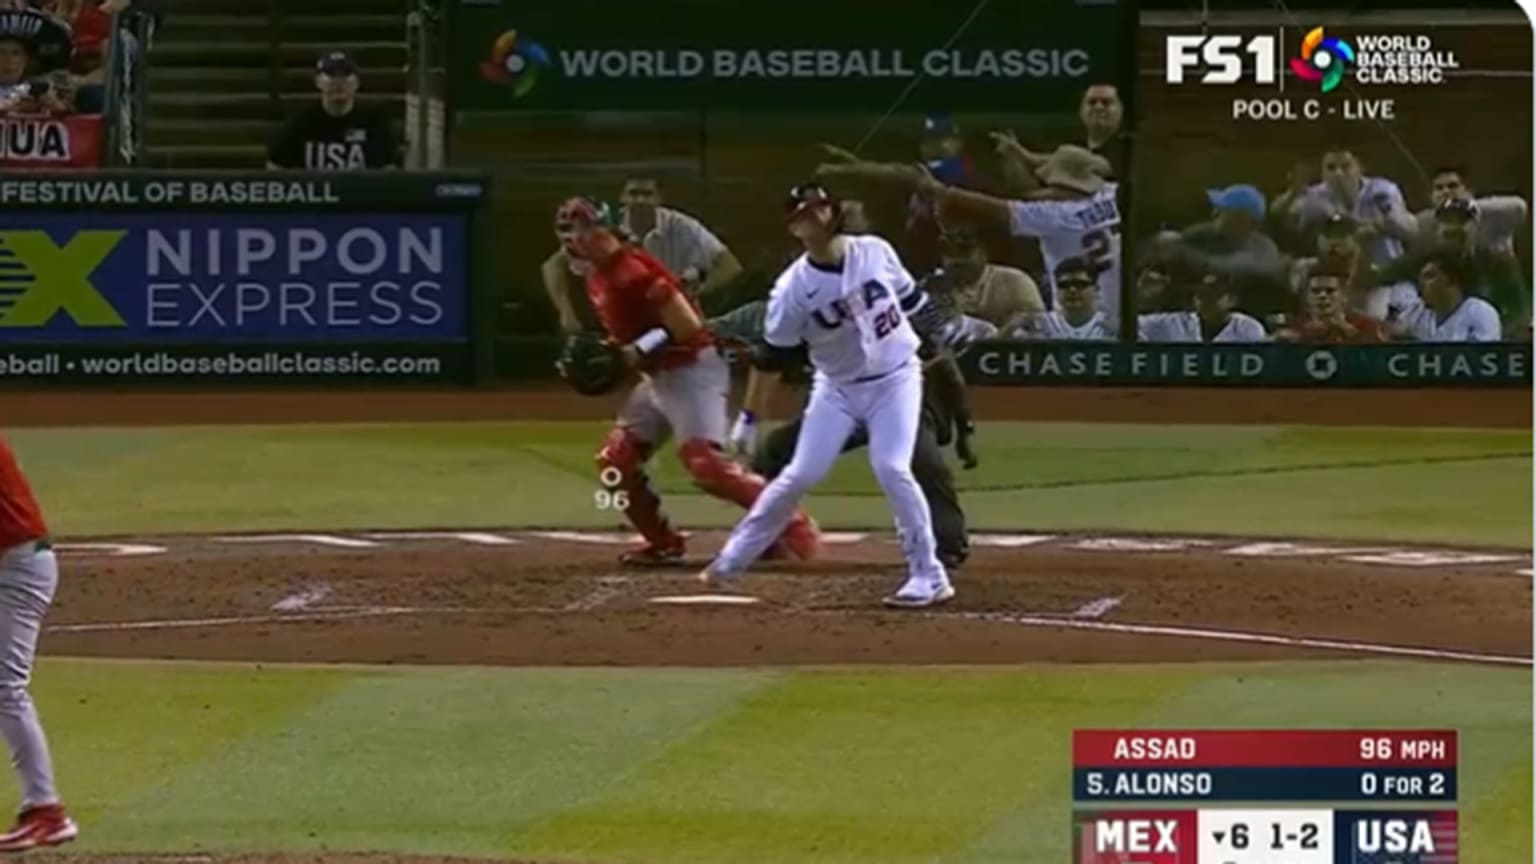 A screenshot of a batter finishing a swing and fans behind the plate signaling a strikeout